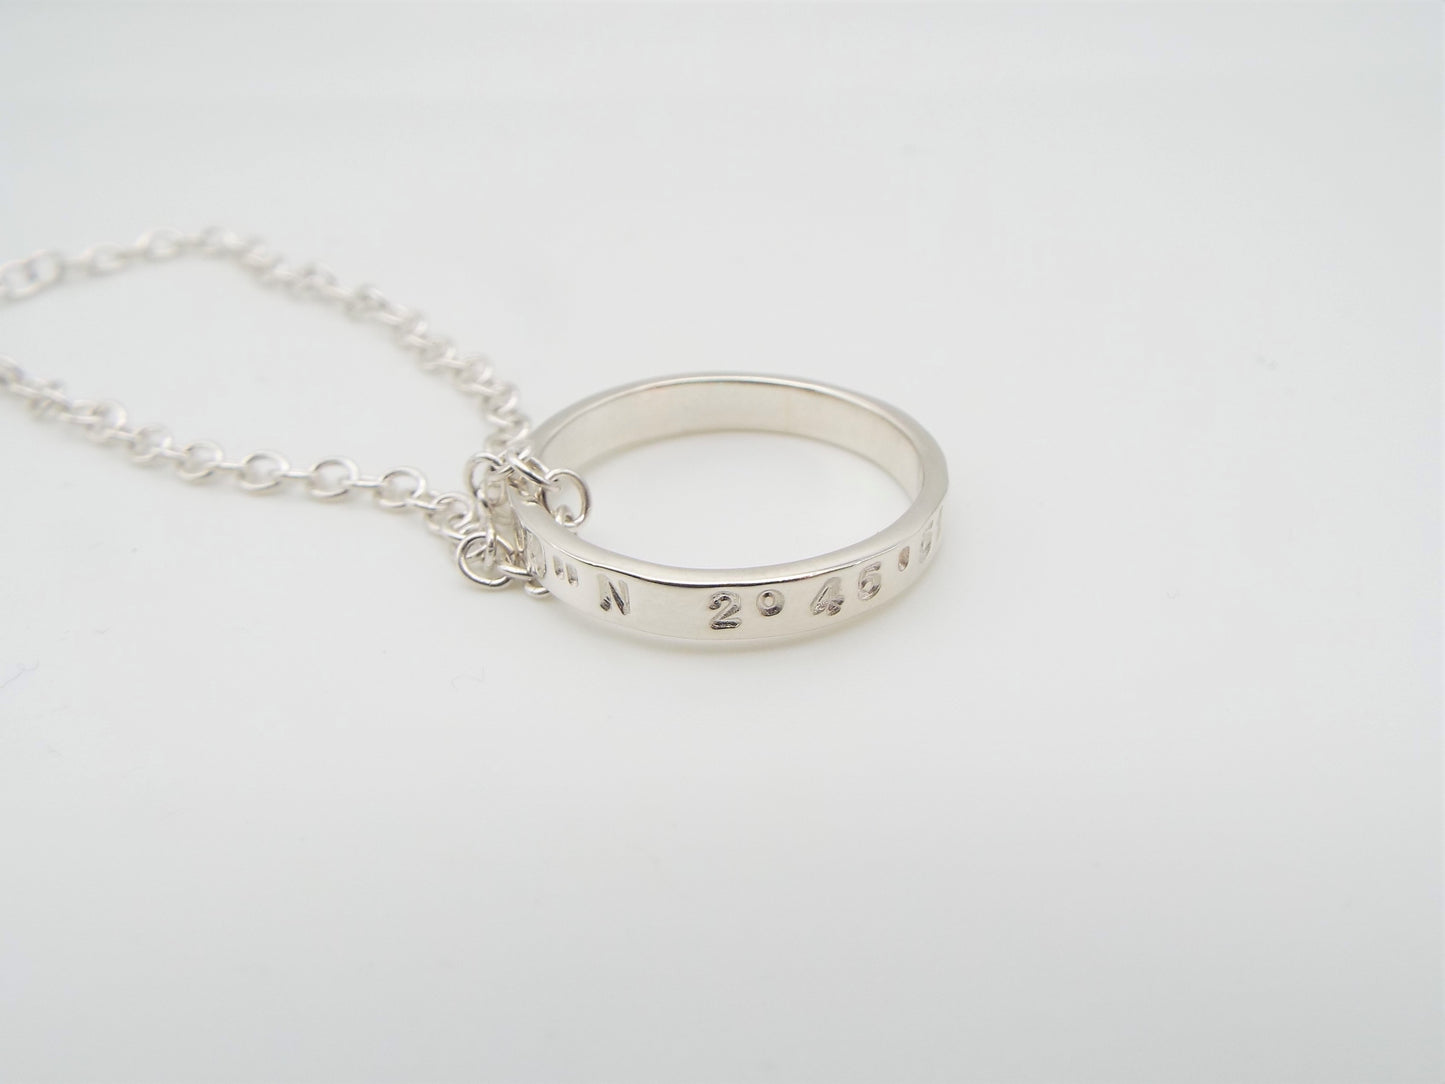 GPS Coordinates Ring Pendant Necklace - Sterling silver